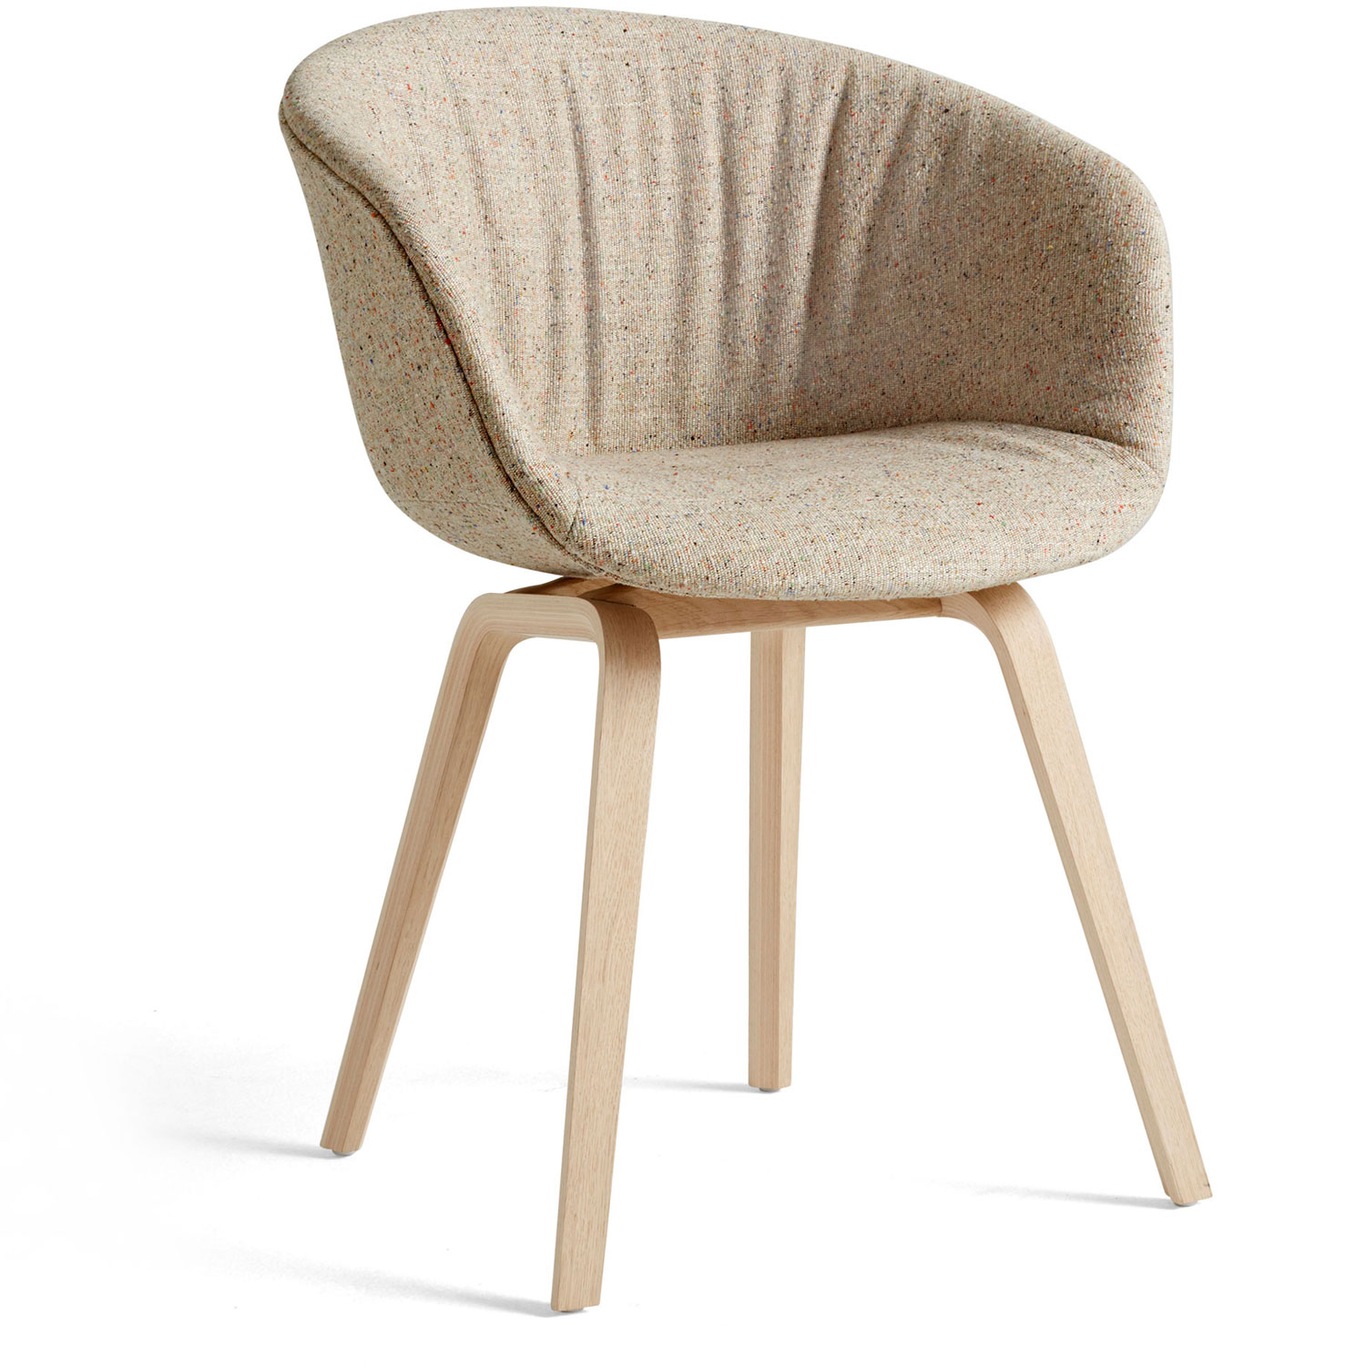 AAC 23 Soft Chair, Water-based Lacquered Oak / Bolgheri Lgg60